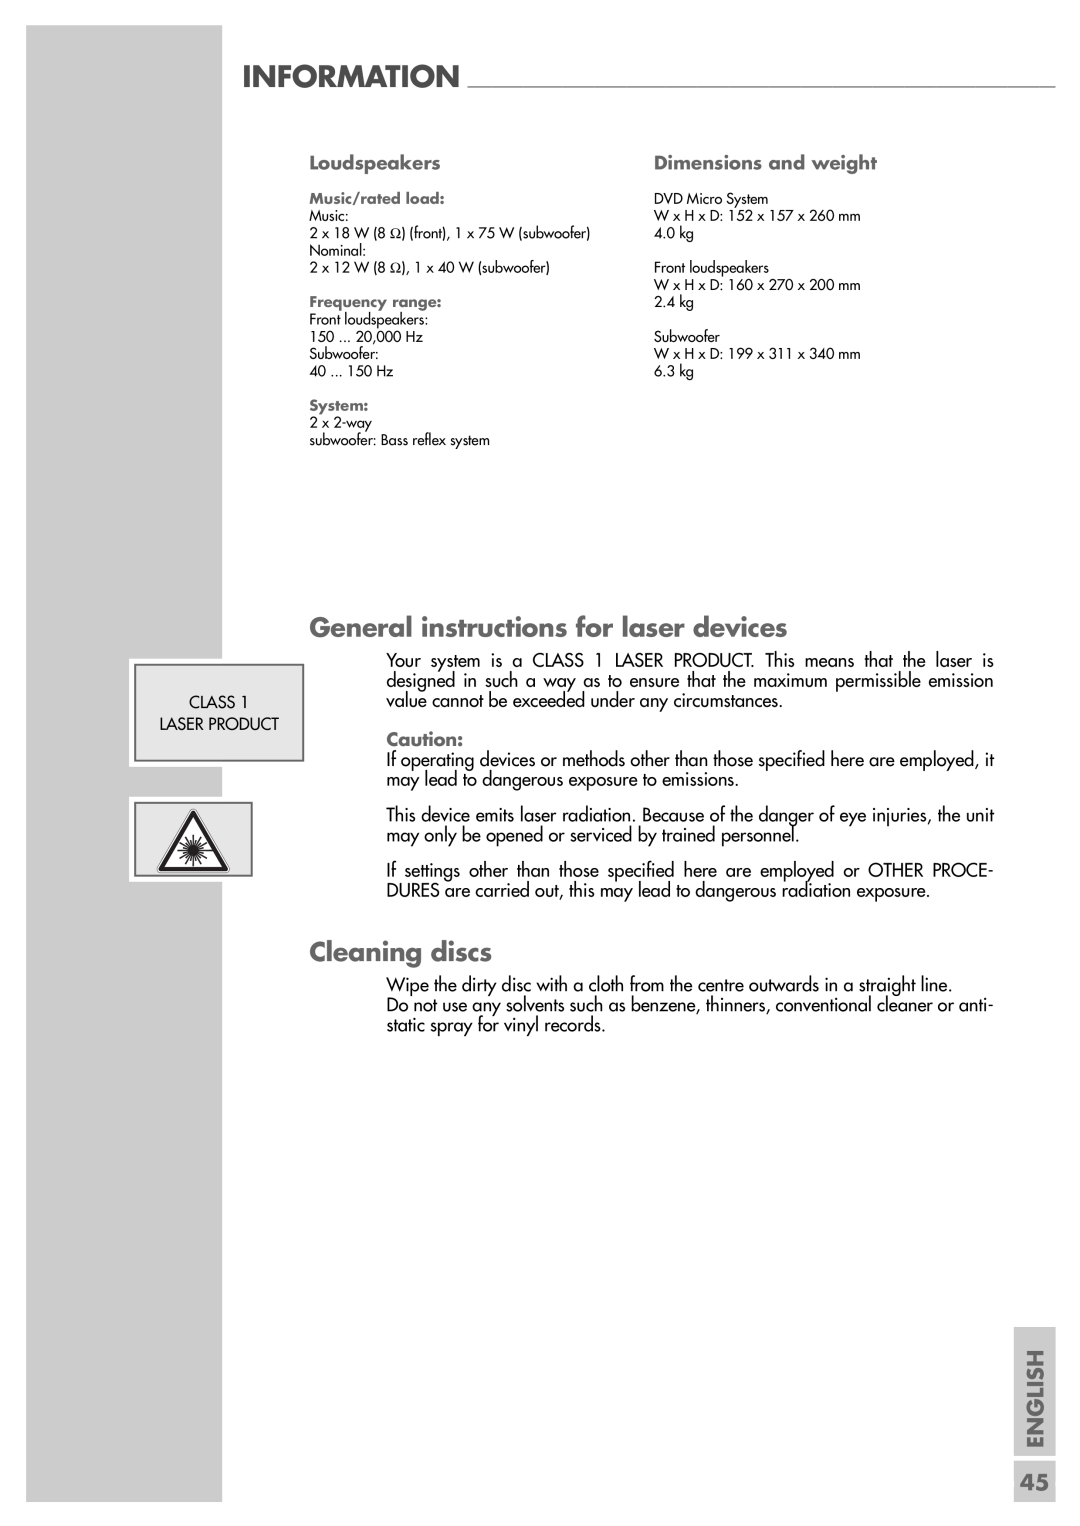 Grundig Scenos UMS 4400 DVD manual General instructions for laser devices, Cleaning discs, English, Loudspeakers 